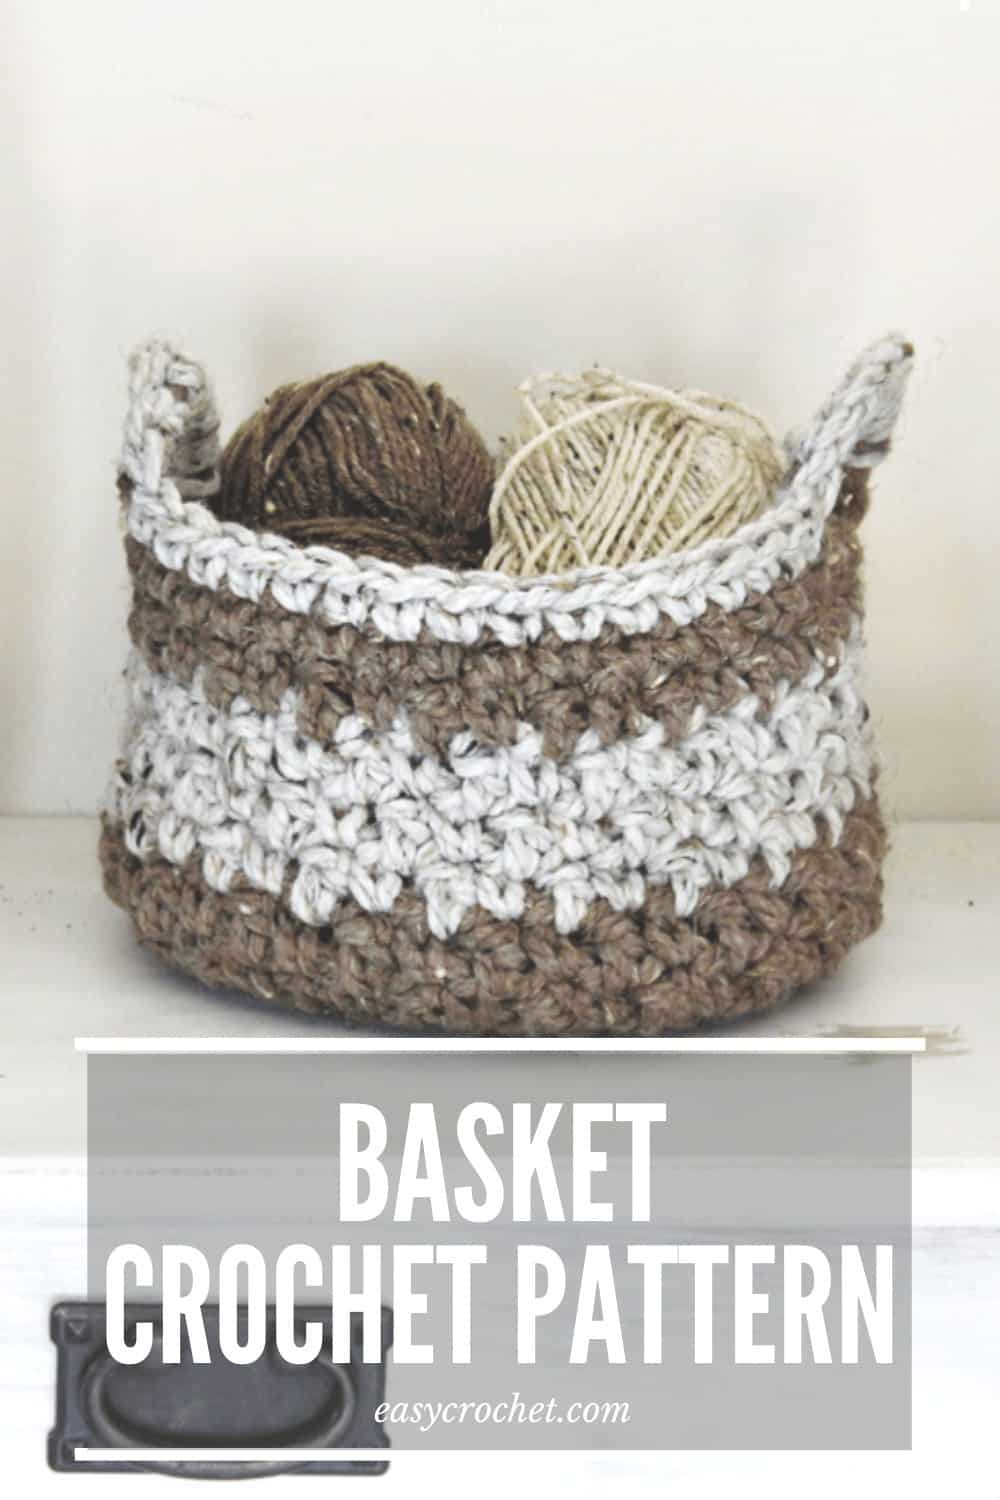 Free Crochet Basket Pattern using Chunky Yarn! Great project for newer crocheters who want to try something a bit challenging! via @easycrochetcom